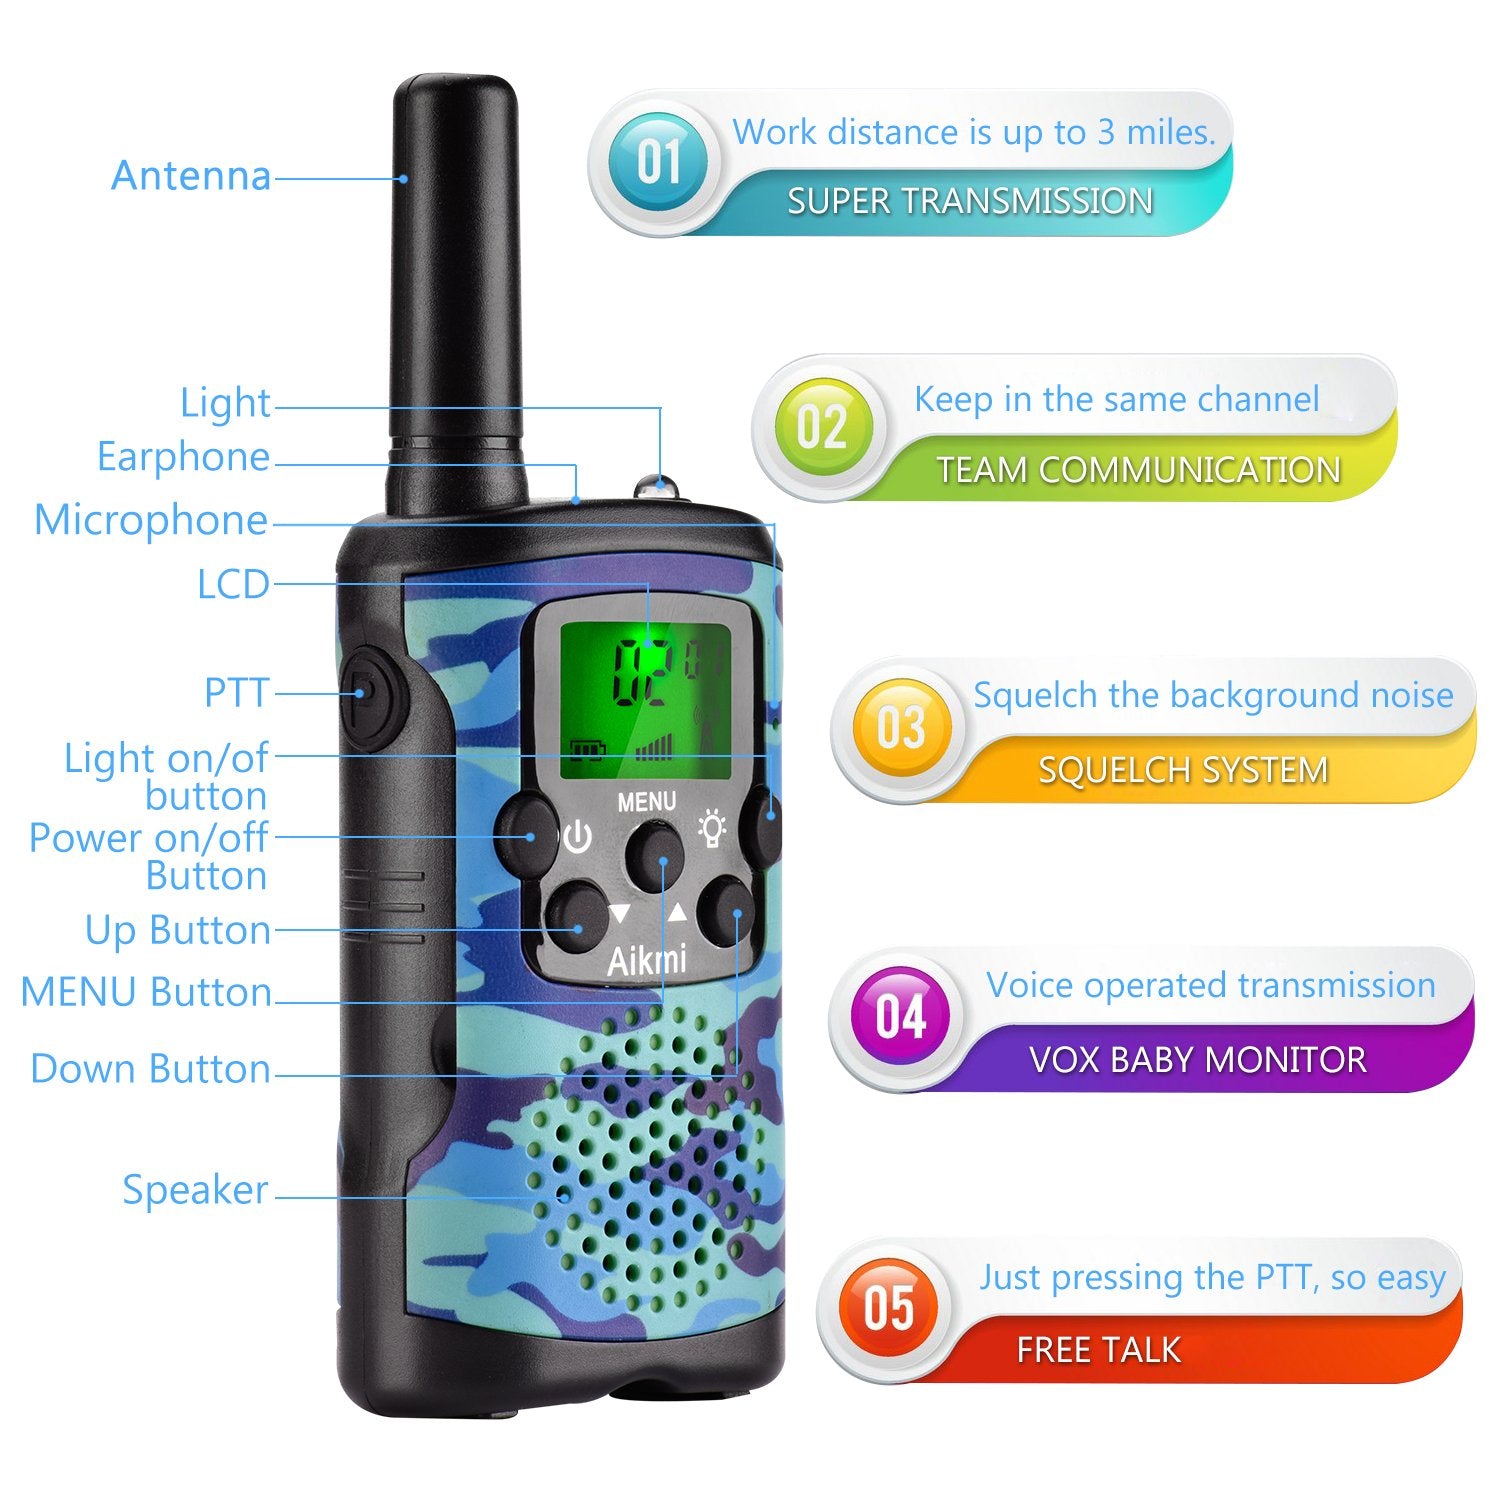 Walkie Talkies for Kids 22 Channel 2 Way Radio 3 Miles Long Range Handheld Walkie Talkies Durable Toy Best Birthday Gifts for 6 Year Old Boys and Girls fit Adventure Game Camping (Green Camo 1)